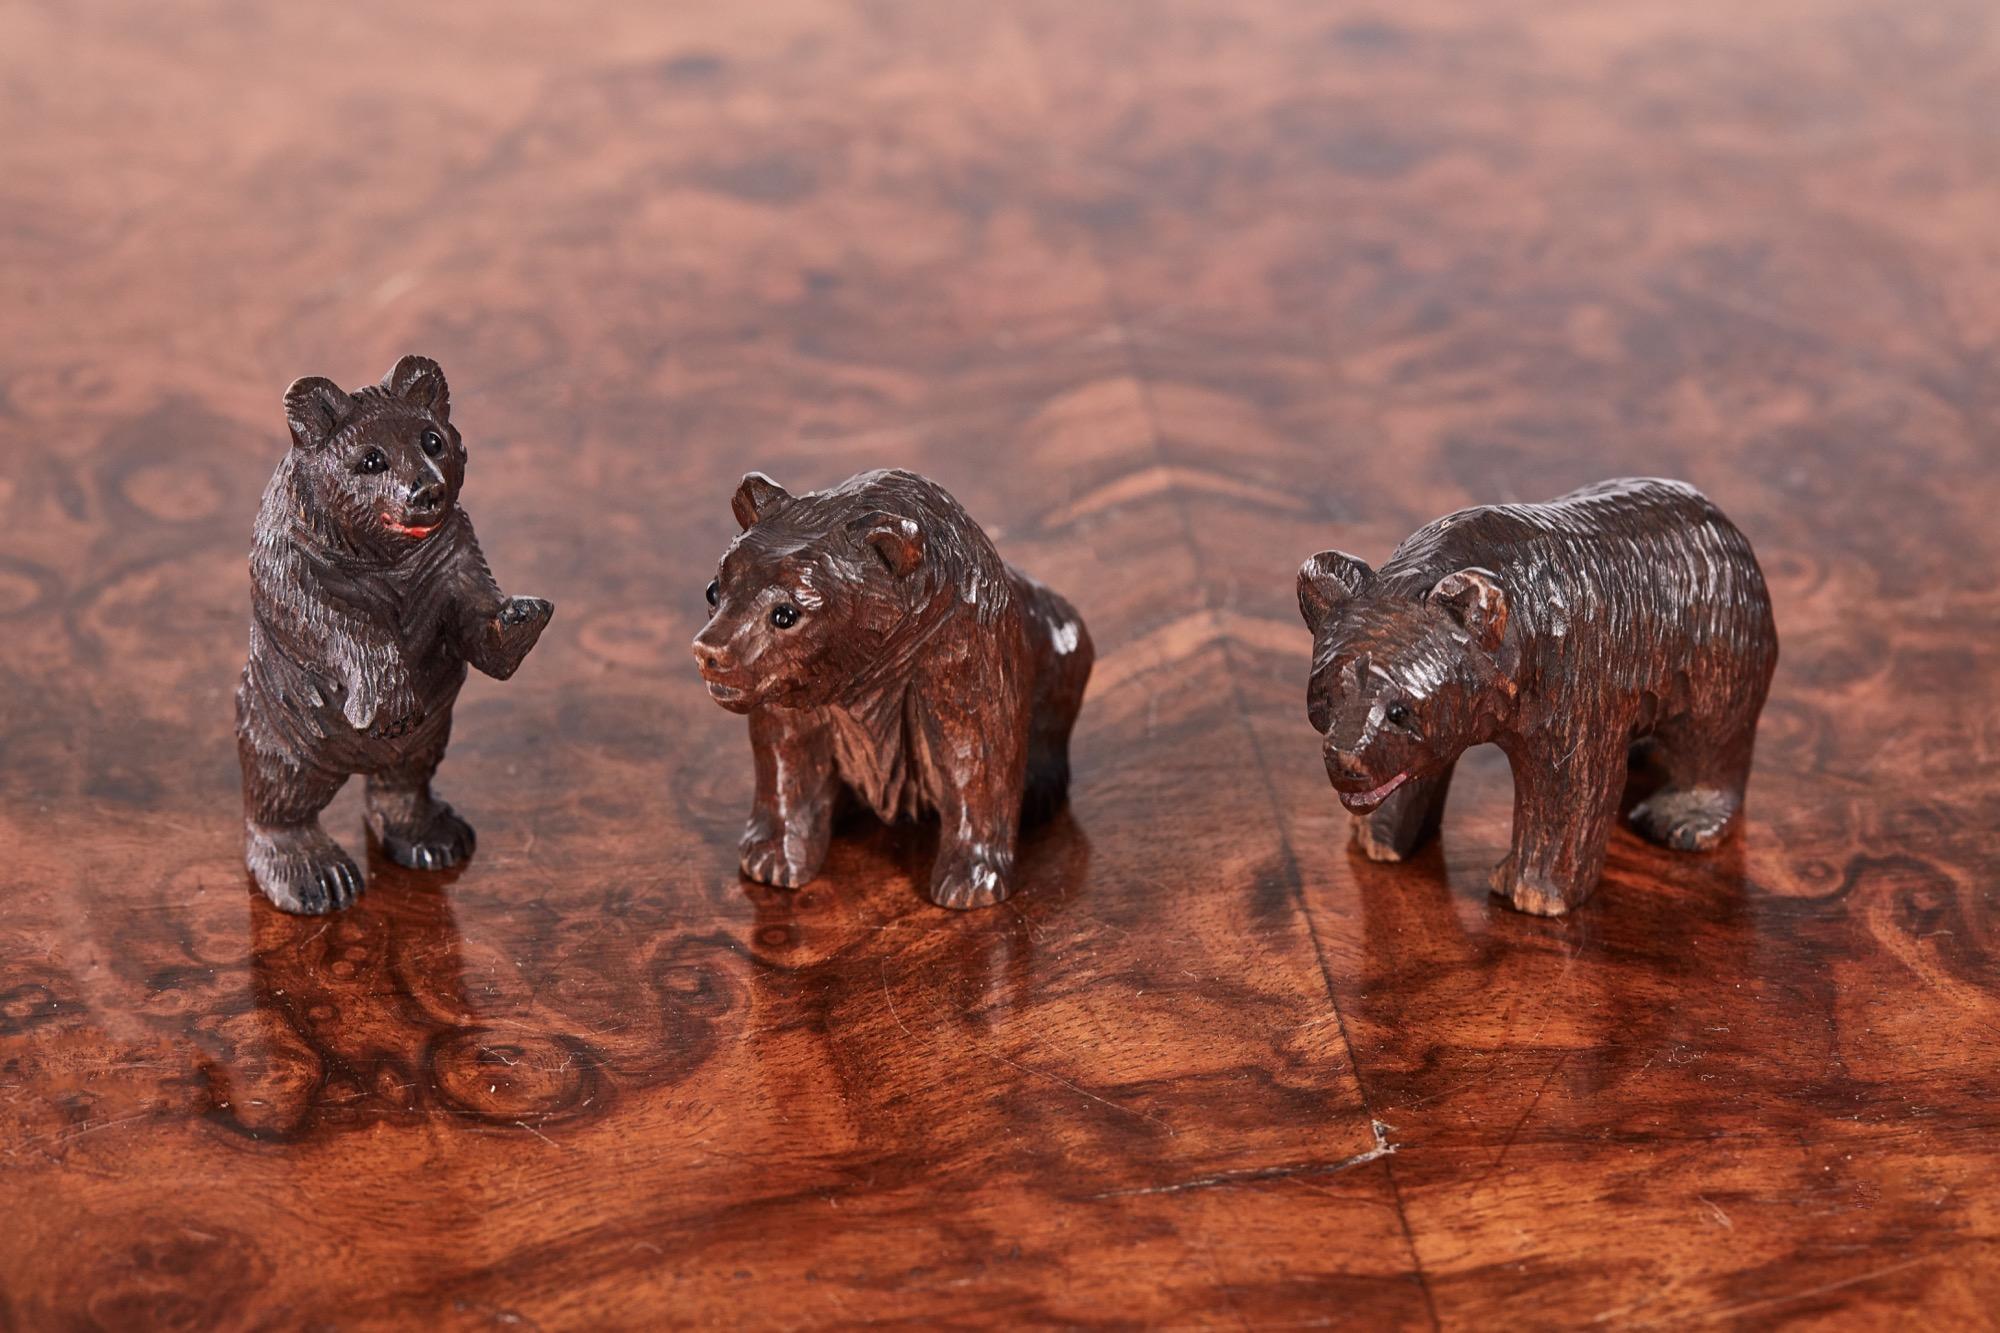 Fifteen 19th century antique miniature carved black forest bears. Some standing, some sitting down, some with original glass eyes. In lovely original condition.
 
A charming collection with splendid quality carving.

Measures: Height : 5 cm -